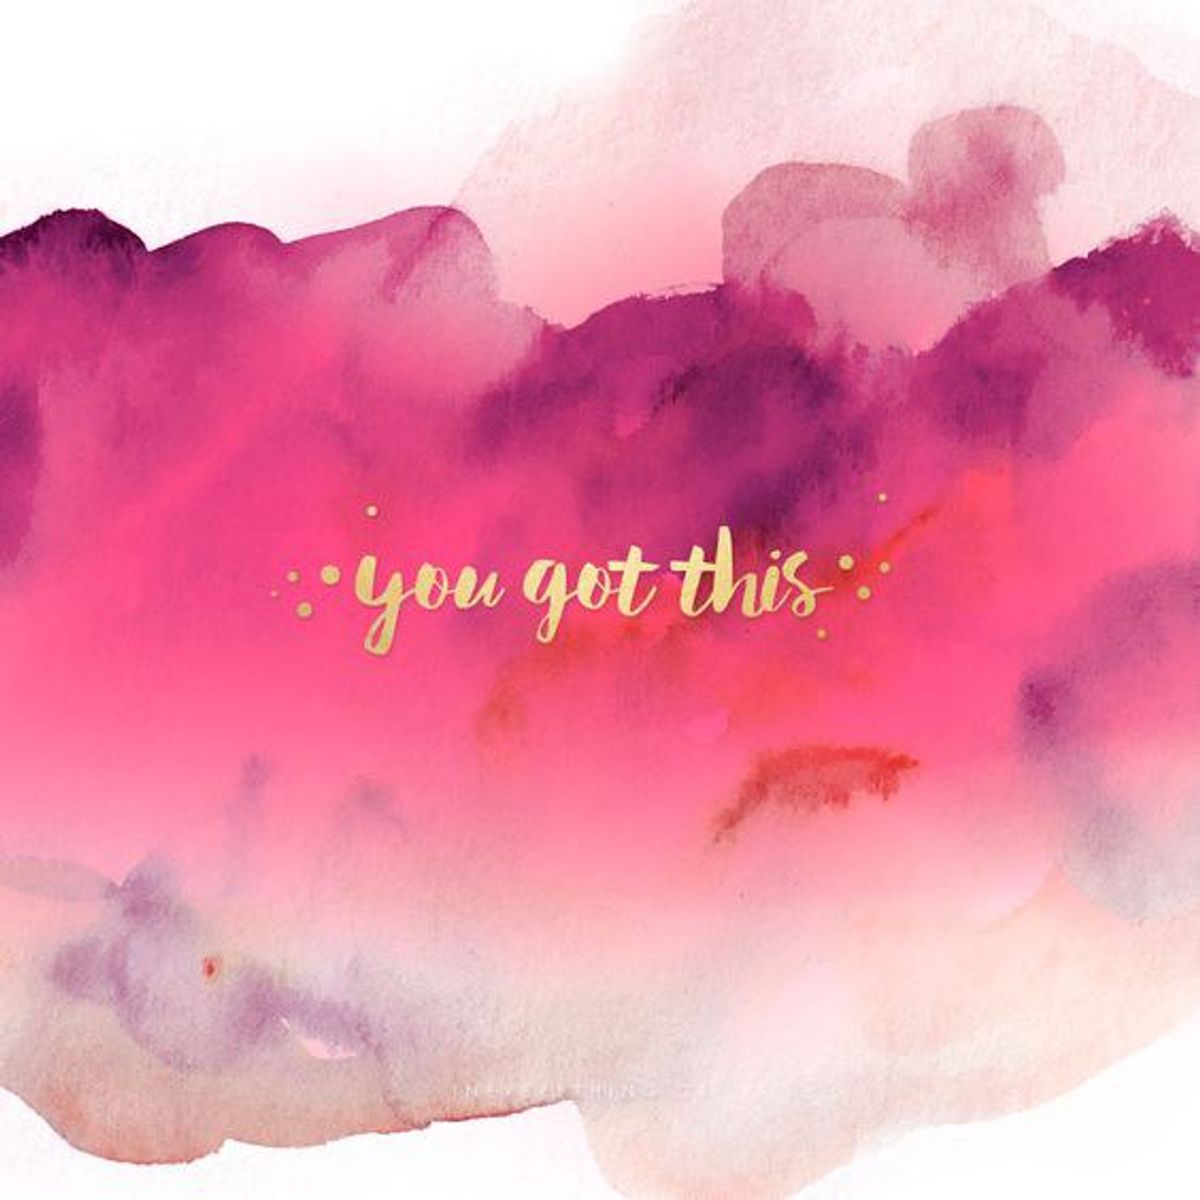 20 Motivational Quotes To Get You Through The Week